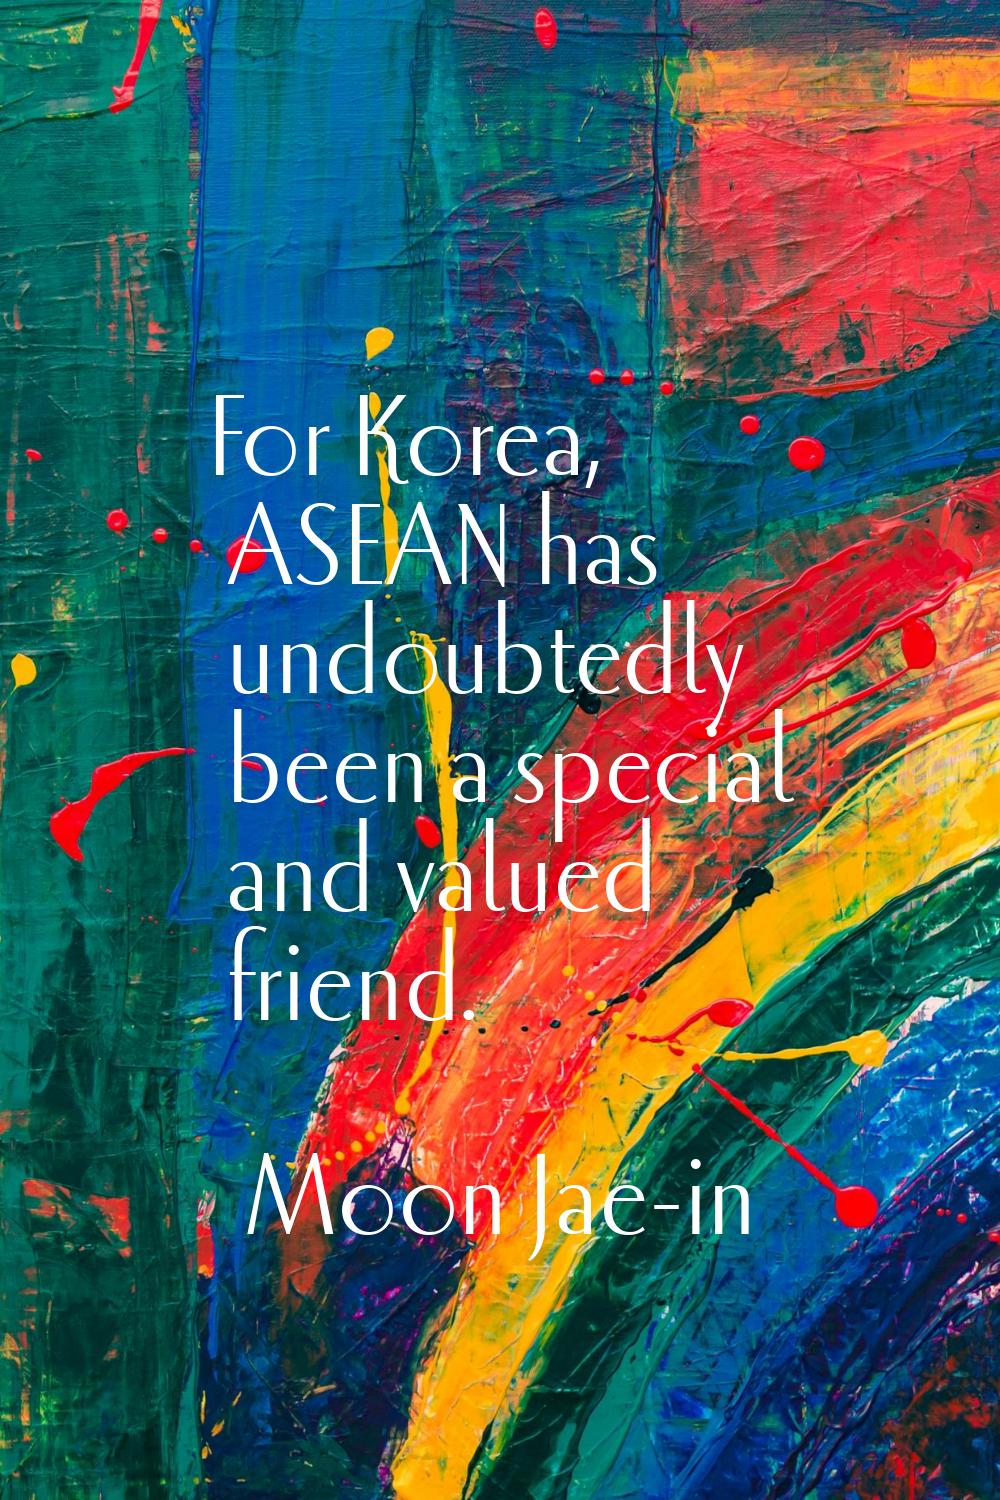 For Korea, ASEAN has undoubtedly been a special and valued friend.